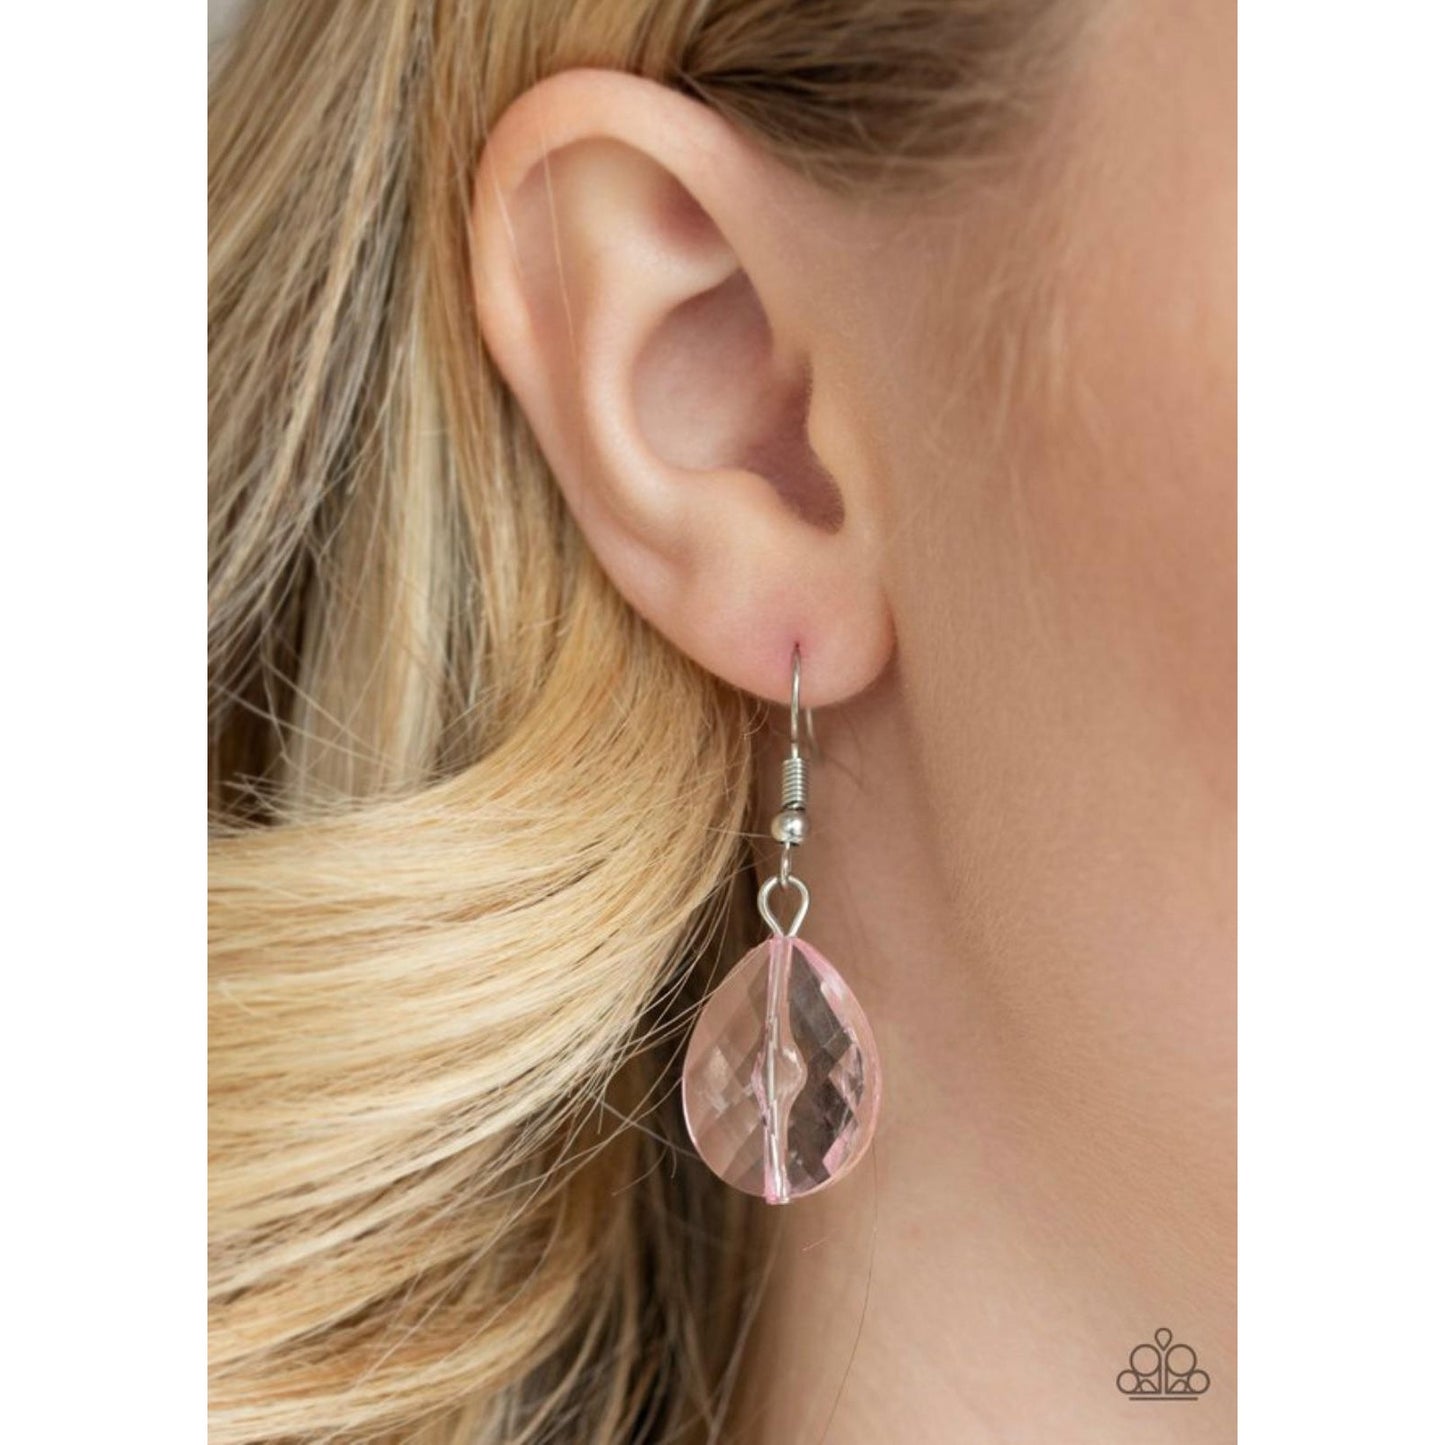 No Tears Left To Cry - Pink Necklace 1548